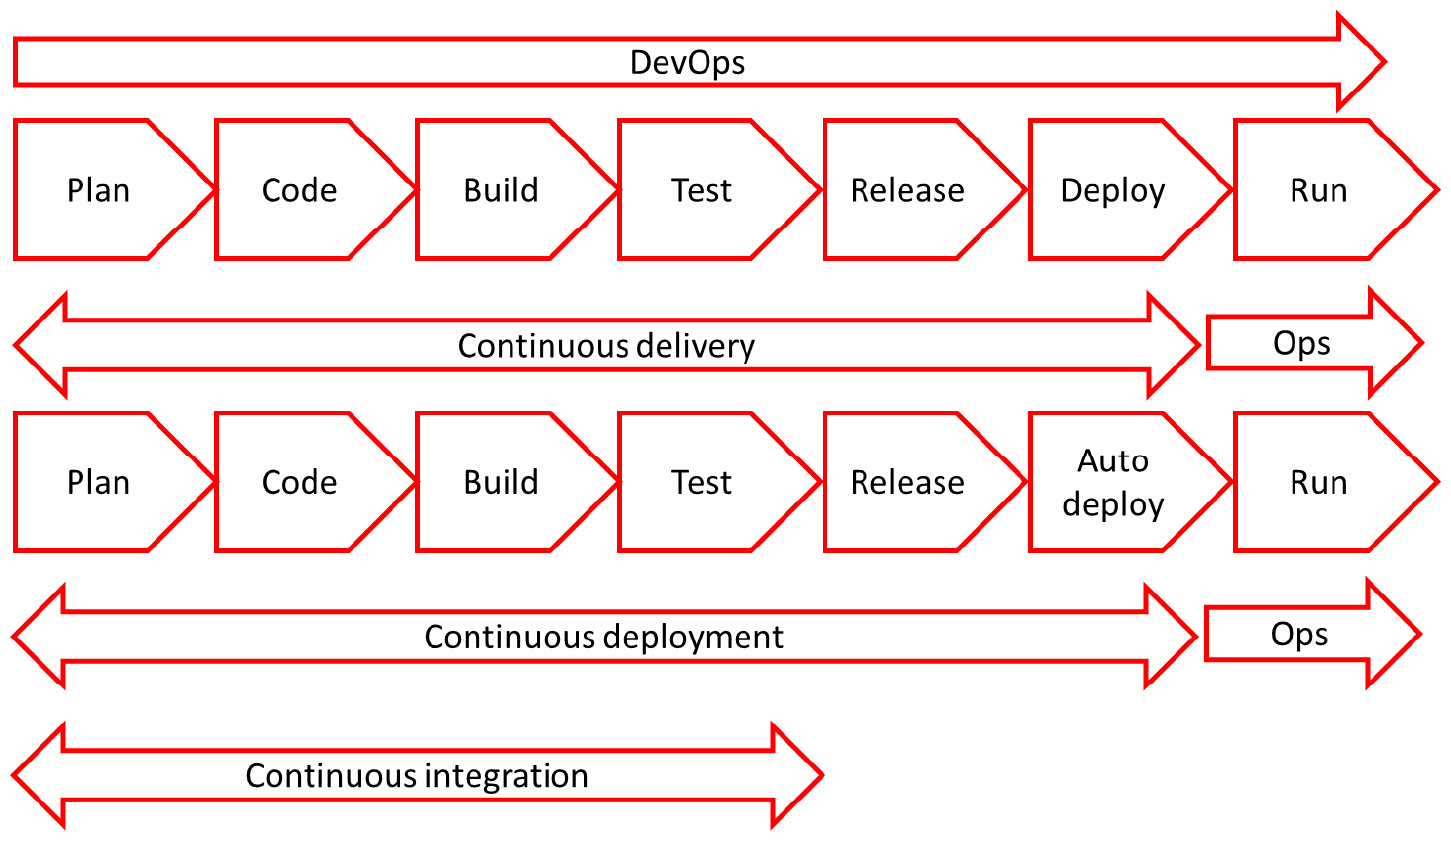 Figure 18.1 – DevOps cycle with CI/CD
